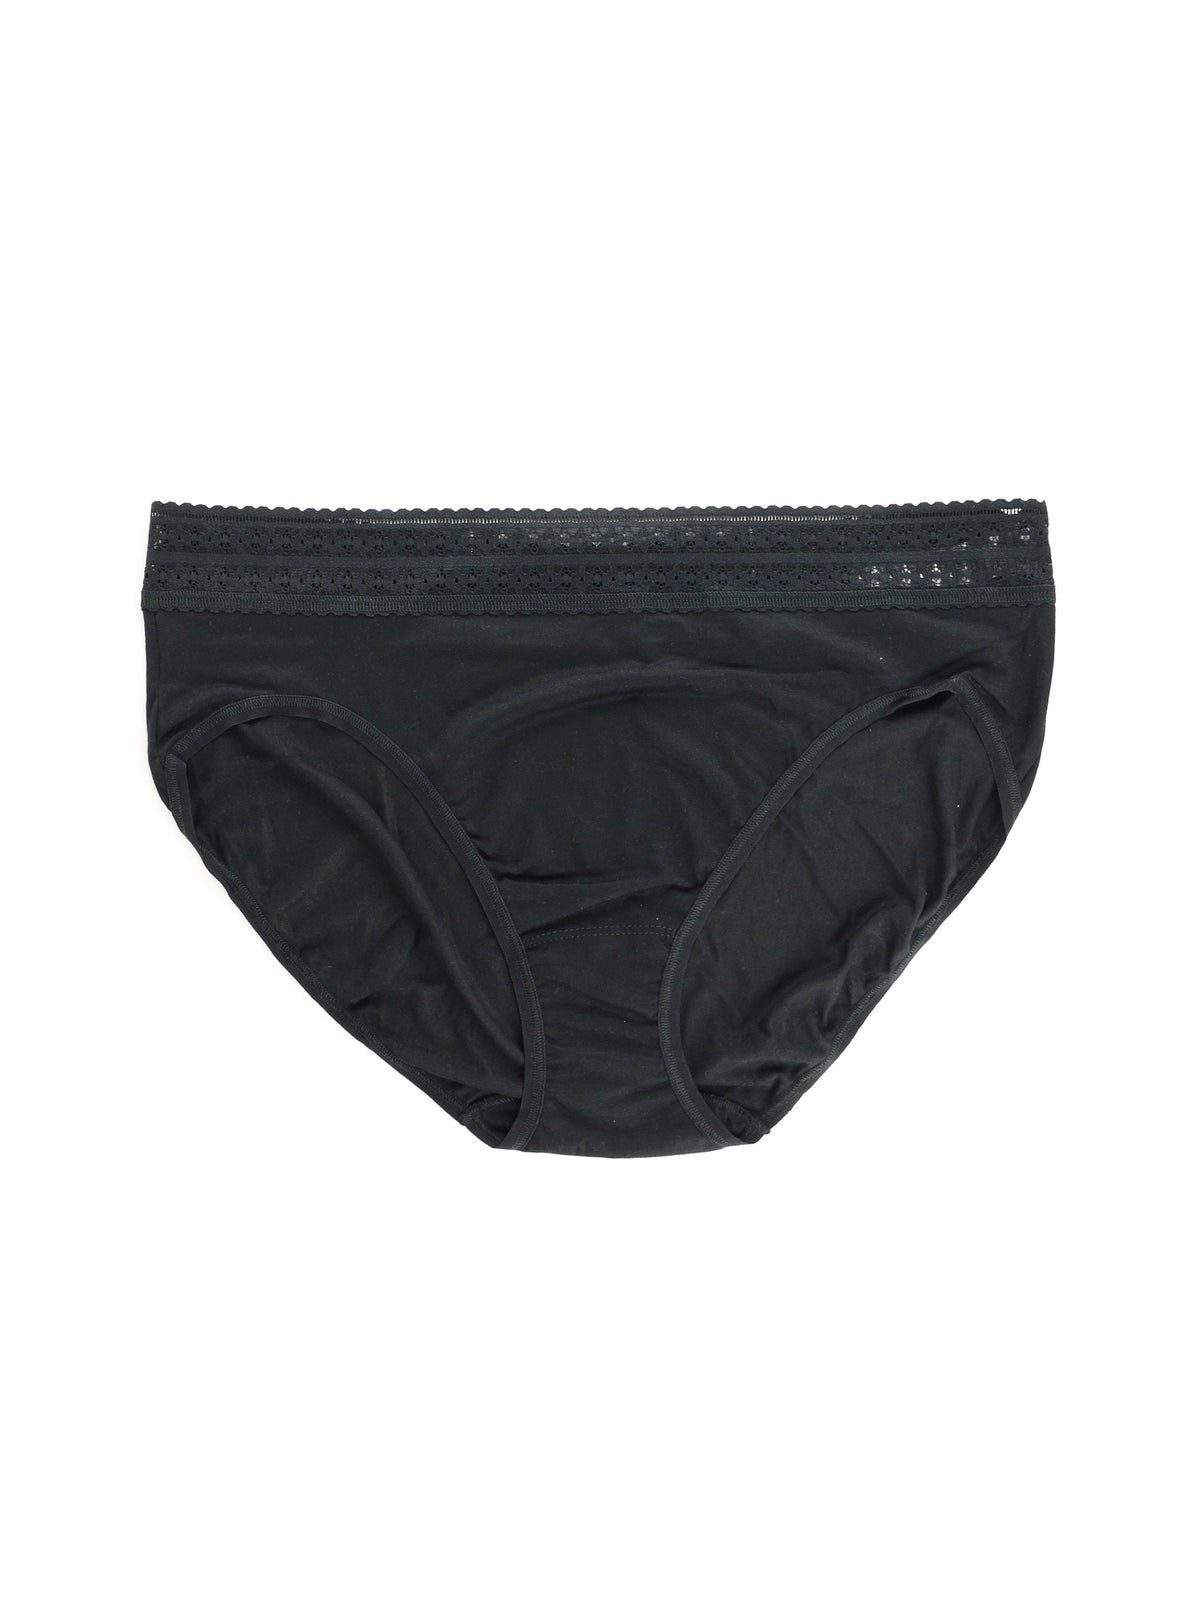 Plus Size DreamEase™ French Brief Exclusive Black | Hanky Panky